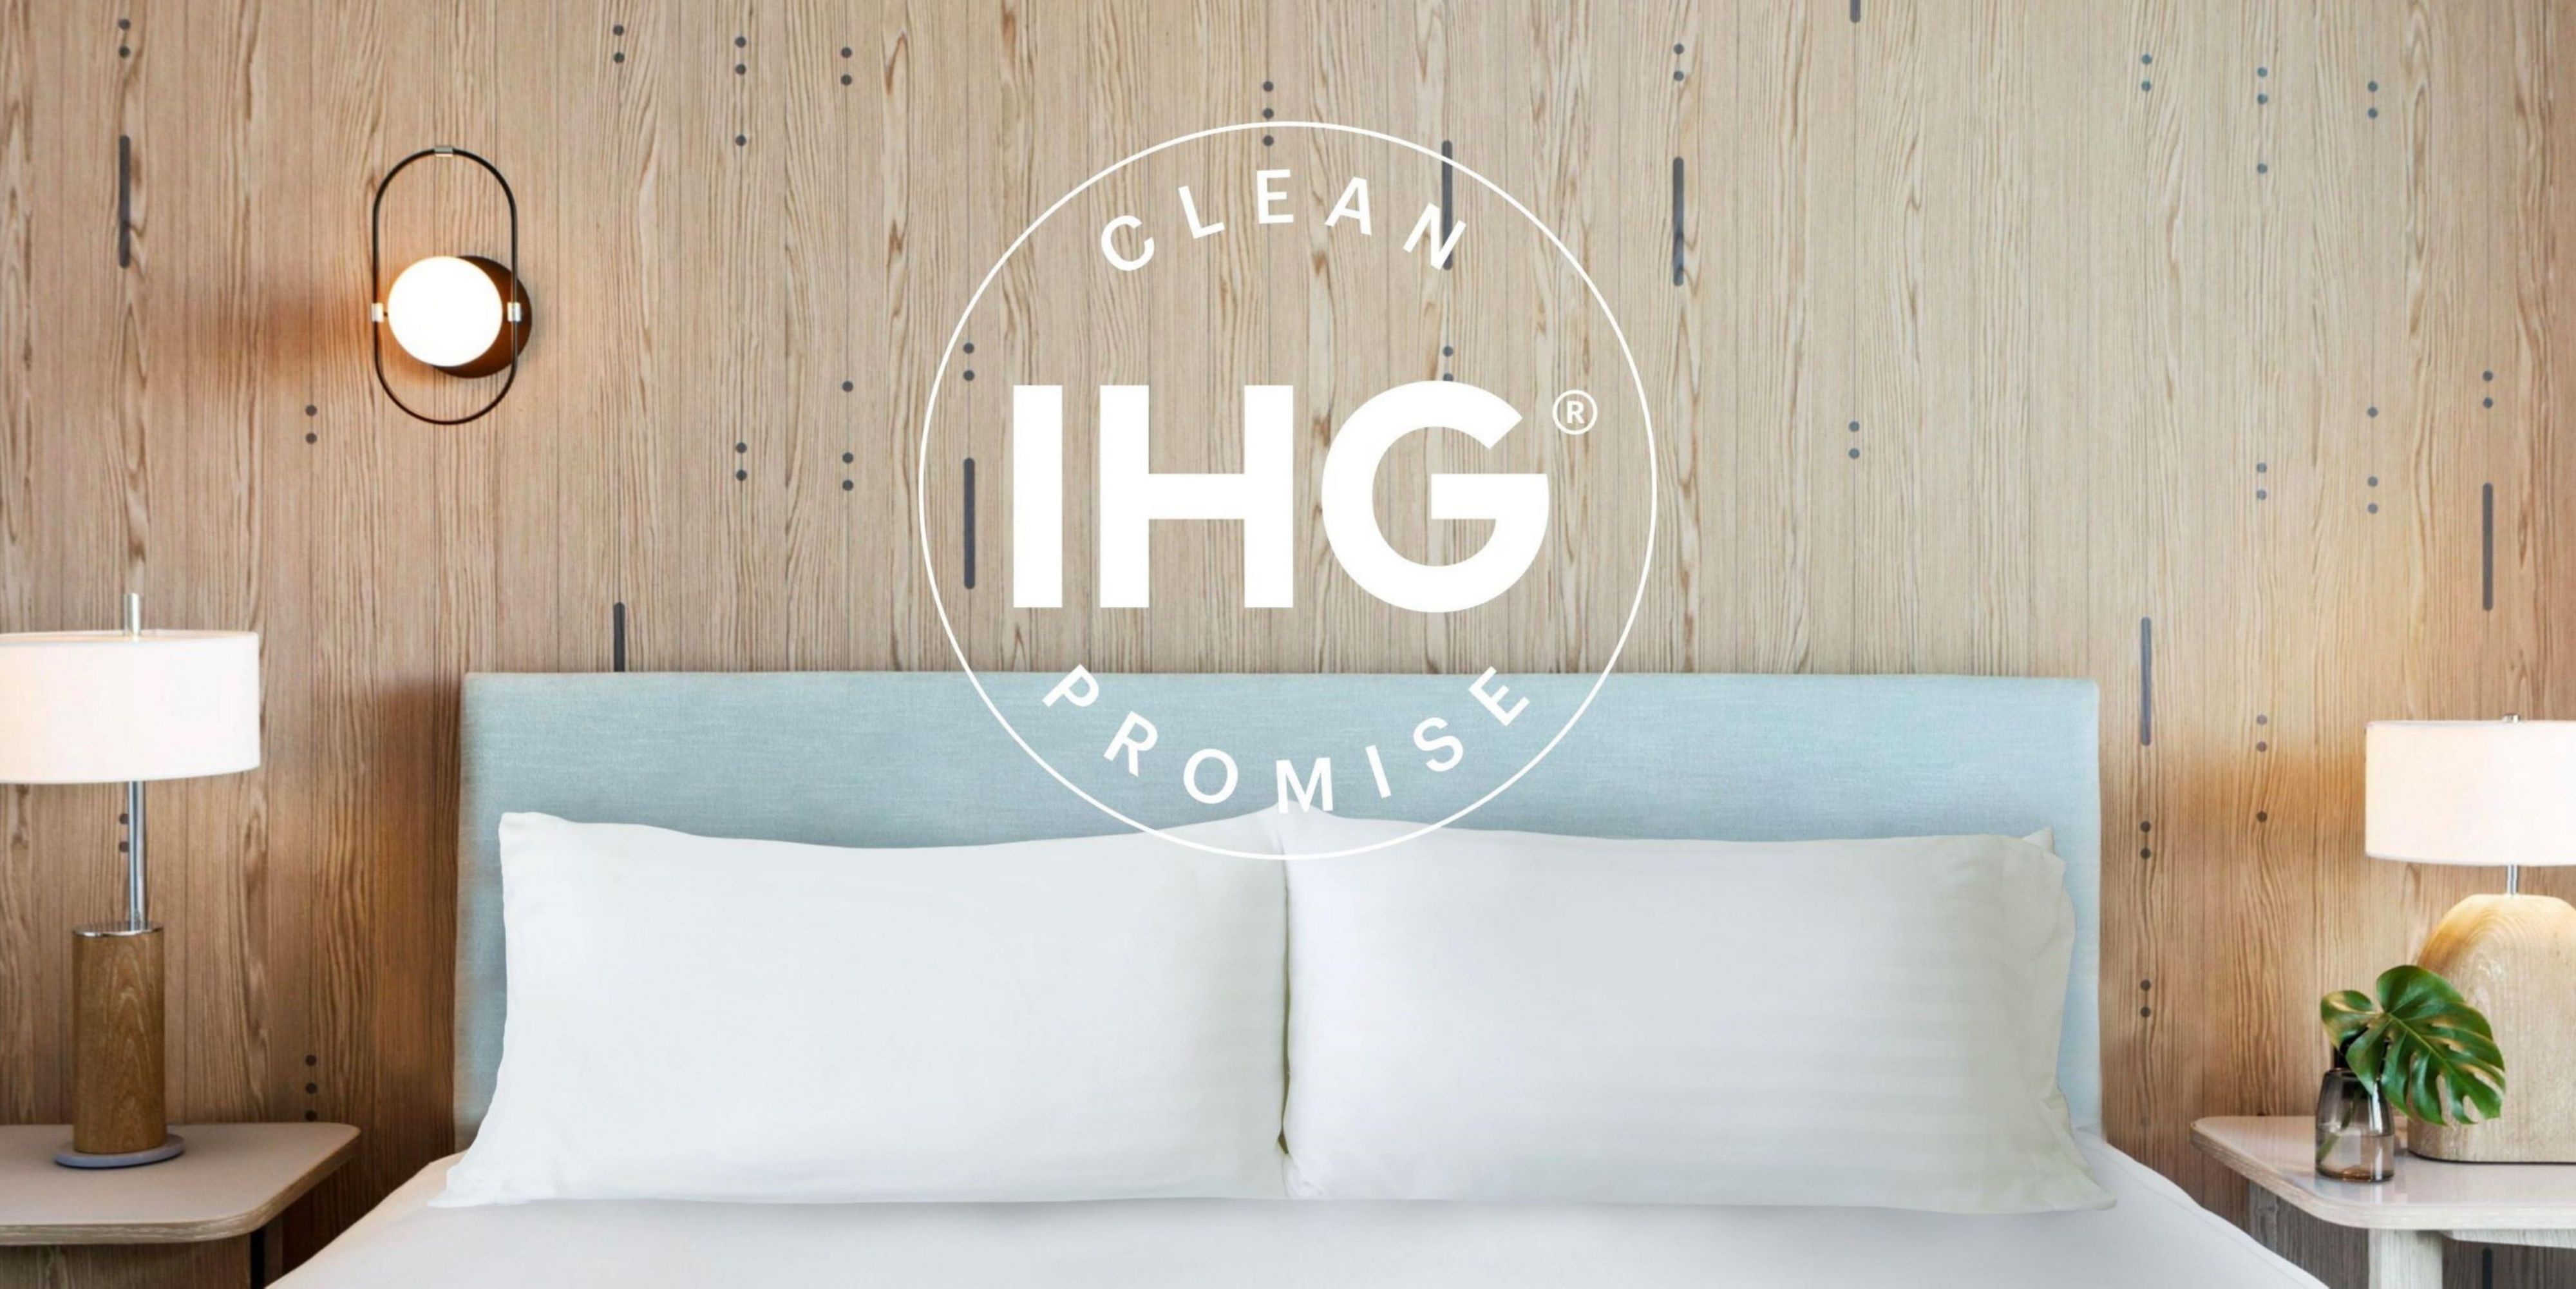 We understand how important cleanliness is to you and as an IHG branded hotel, we deliver the IHG Clean Promise. If your room is not cleaned to your satisfaction, please contact the Front Desk immediately – we promise to make it right – that is the IHG Clean Promise.